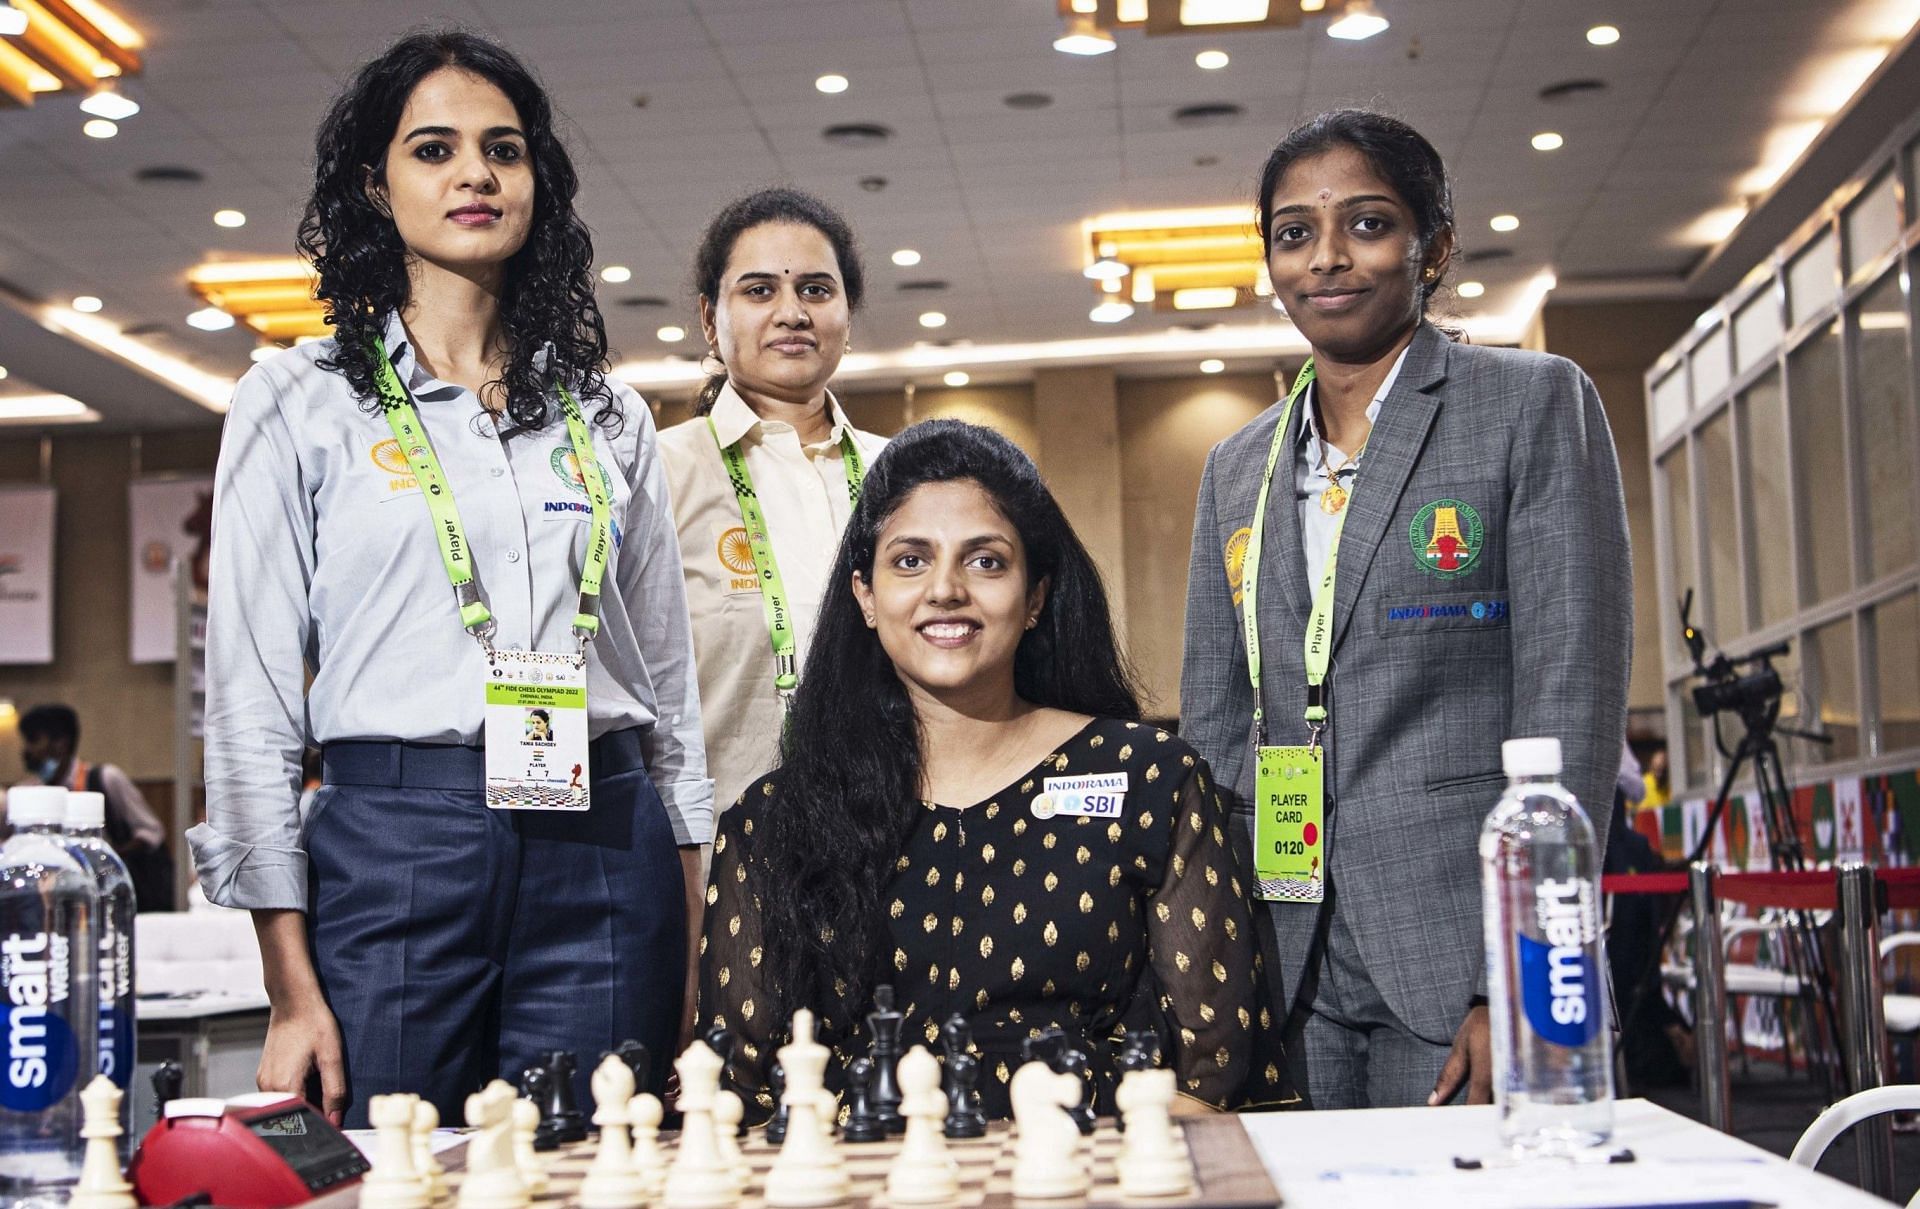 35-year-old Tania Sachdev beat Zsoka Gaal to help India down Hungary in the fourth round of the Chess Olympiad in Chennai on Monday. (FIDE/Lennart Ootes &amp; Stev Bonhage)